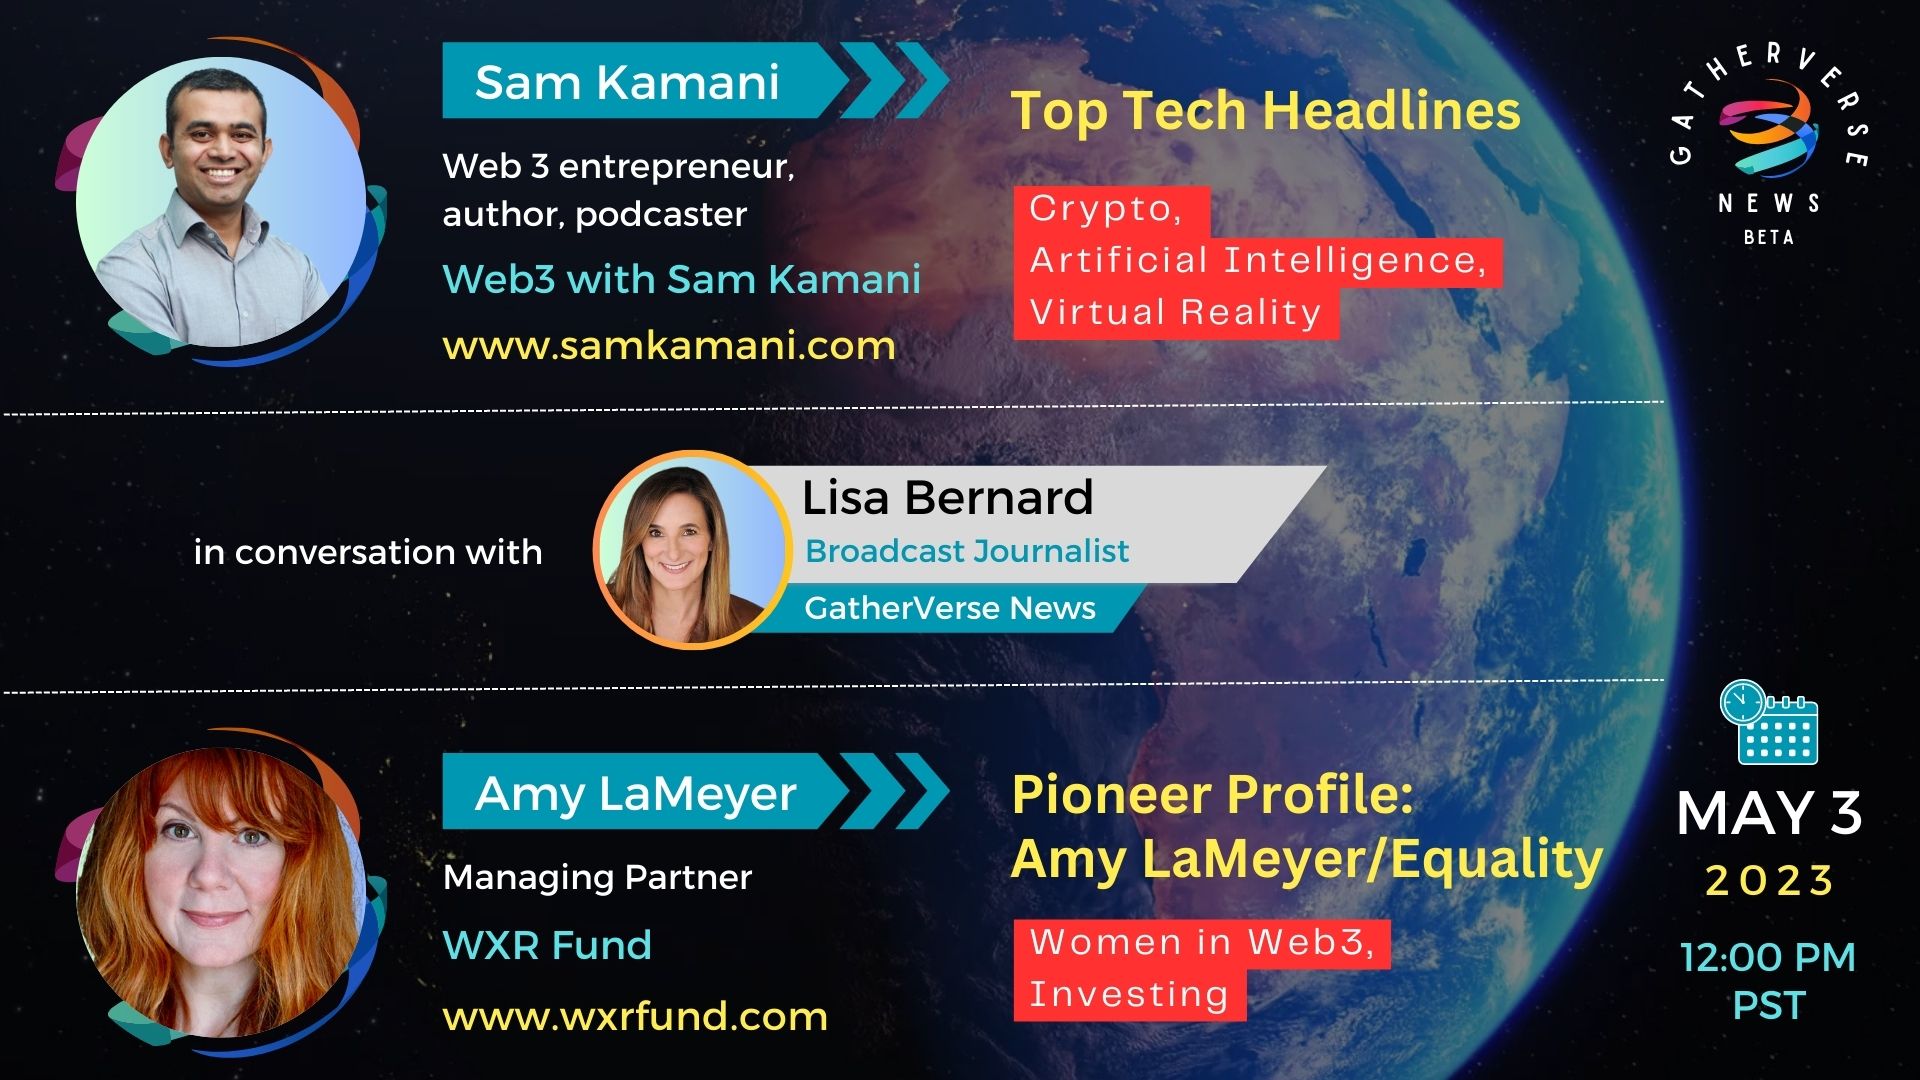 GVN Unscripted - Top Tech Headlines and Pioneer Profile: Amy LaMeyer/Equality